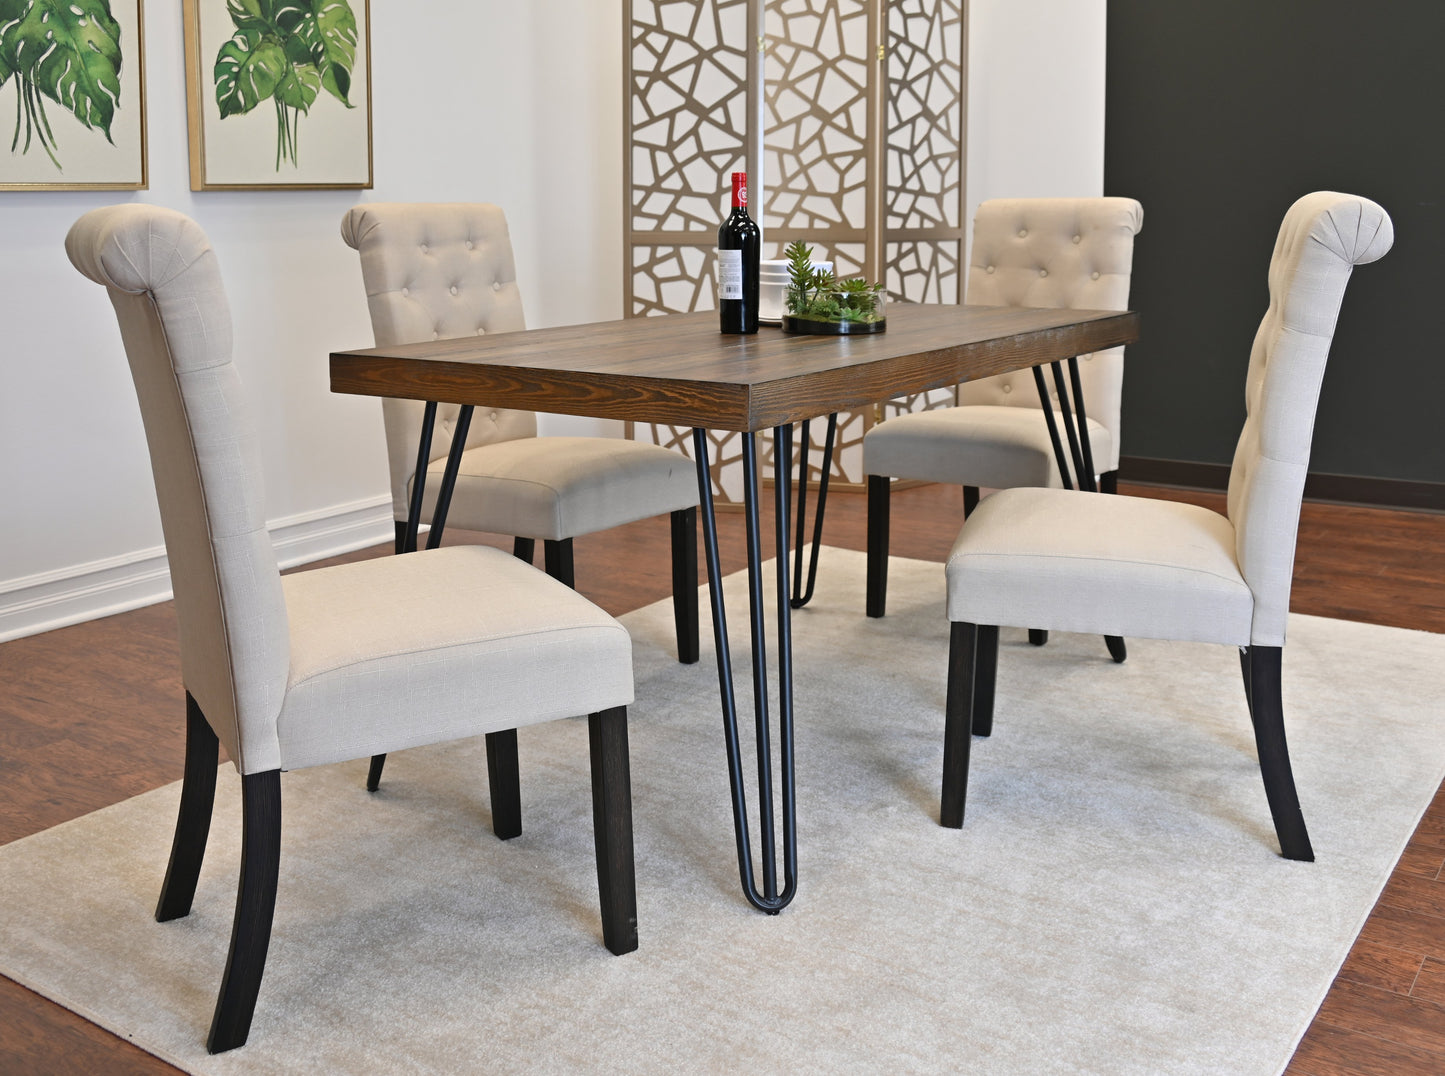 Ashford 5-Piece Dining Set, Hairpin Dining Table with 4 Chairs, 4 Color Options